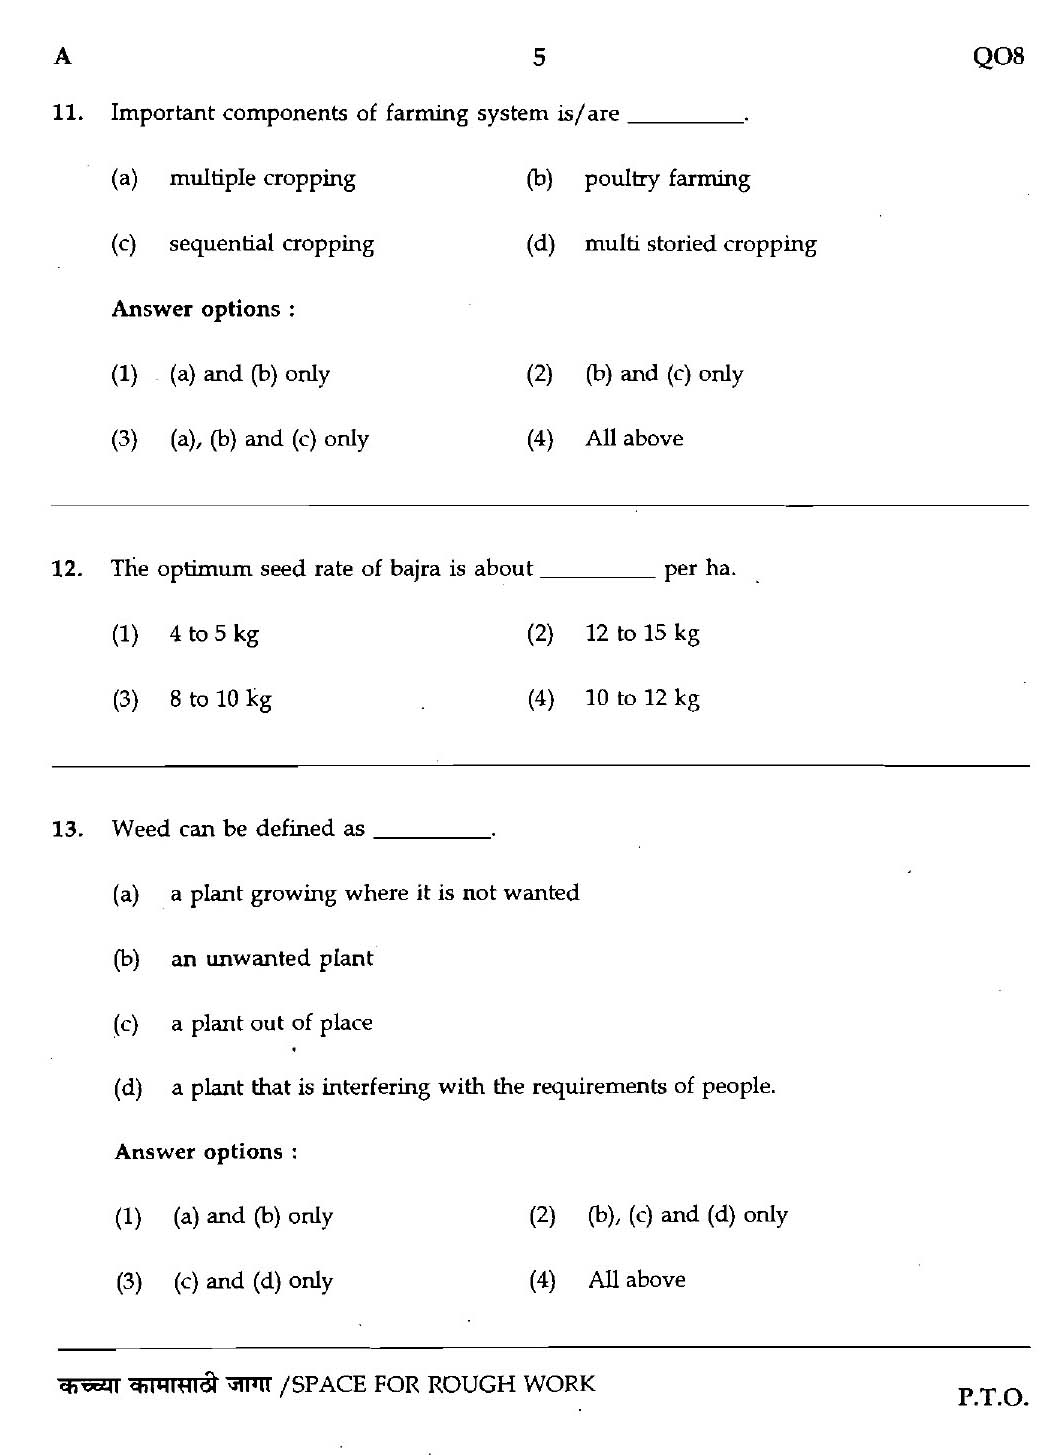 MPSC Agricultural Services Main Exam 2016 Question Paper 1 Agricultural Science 4